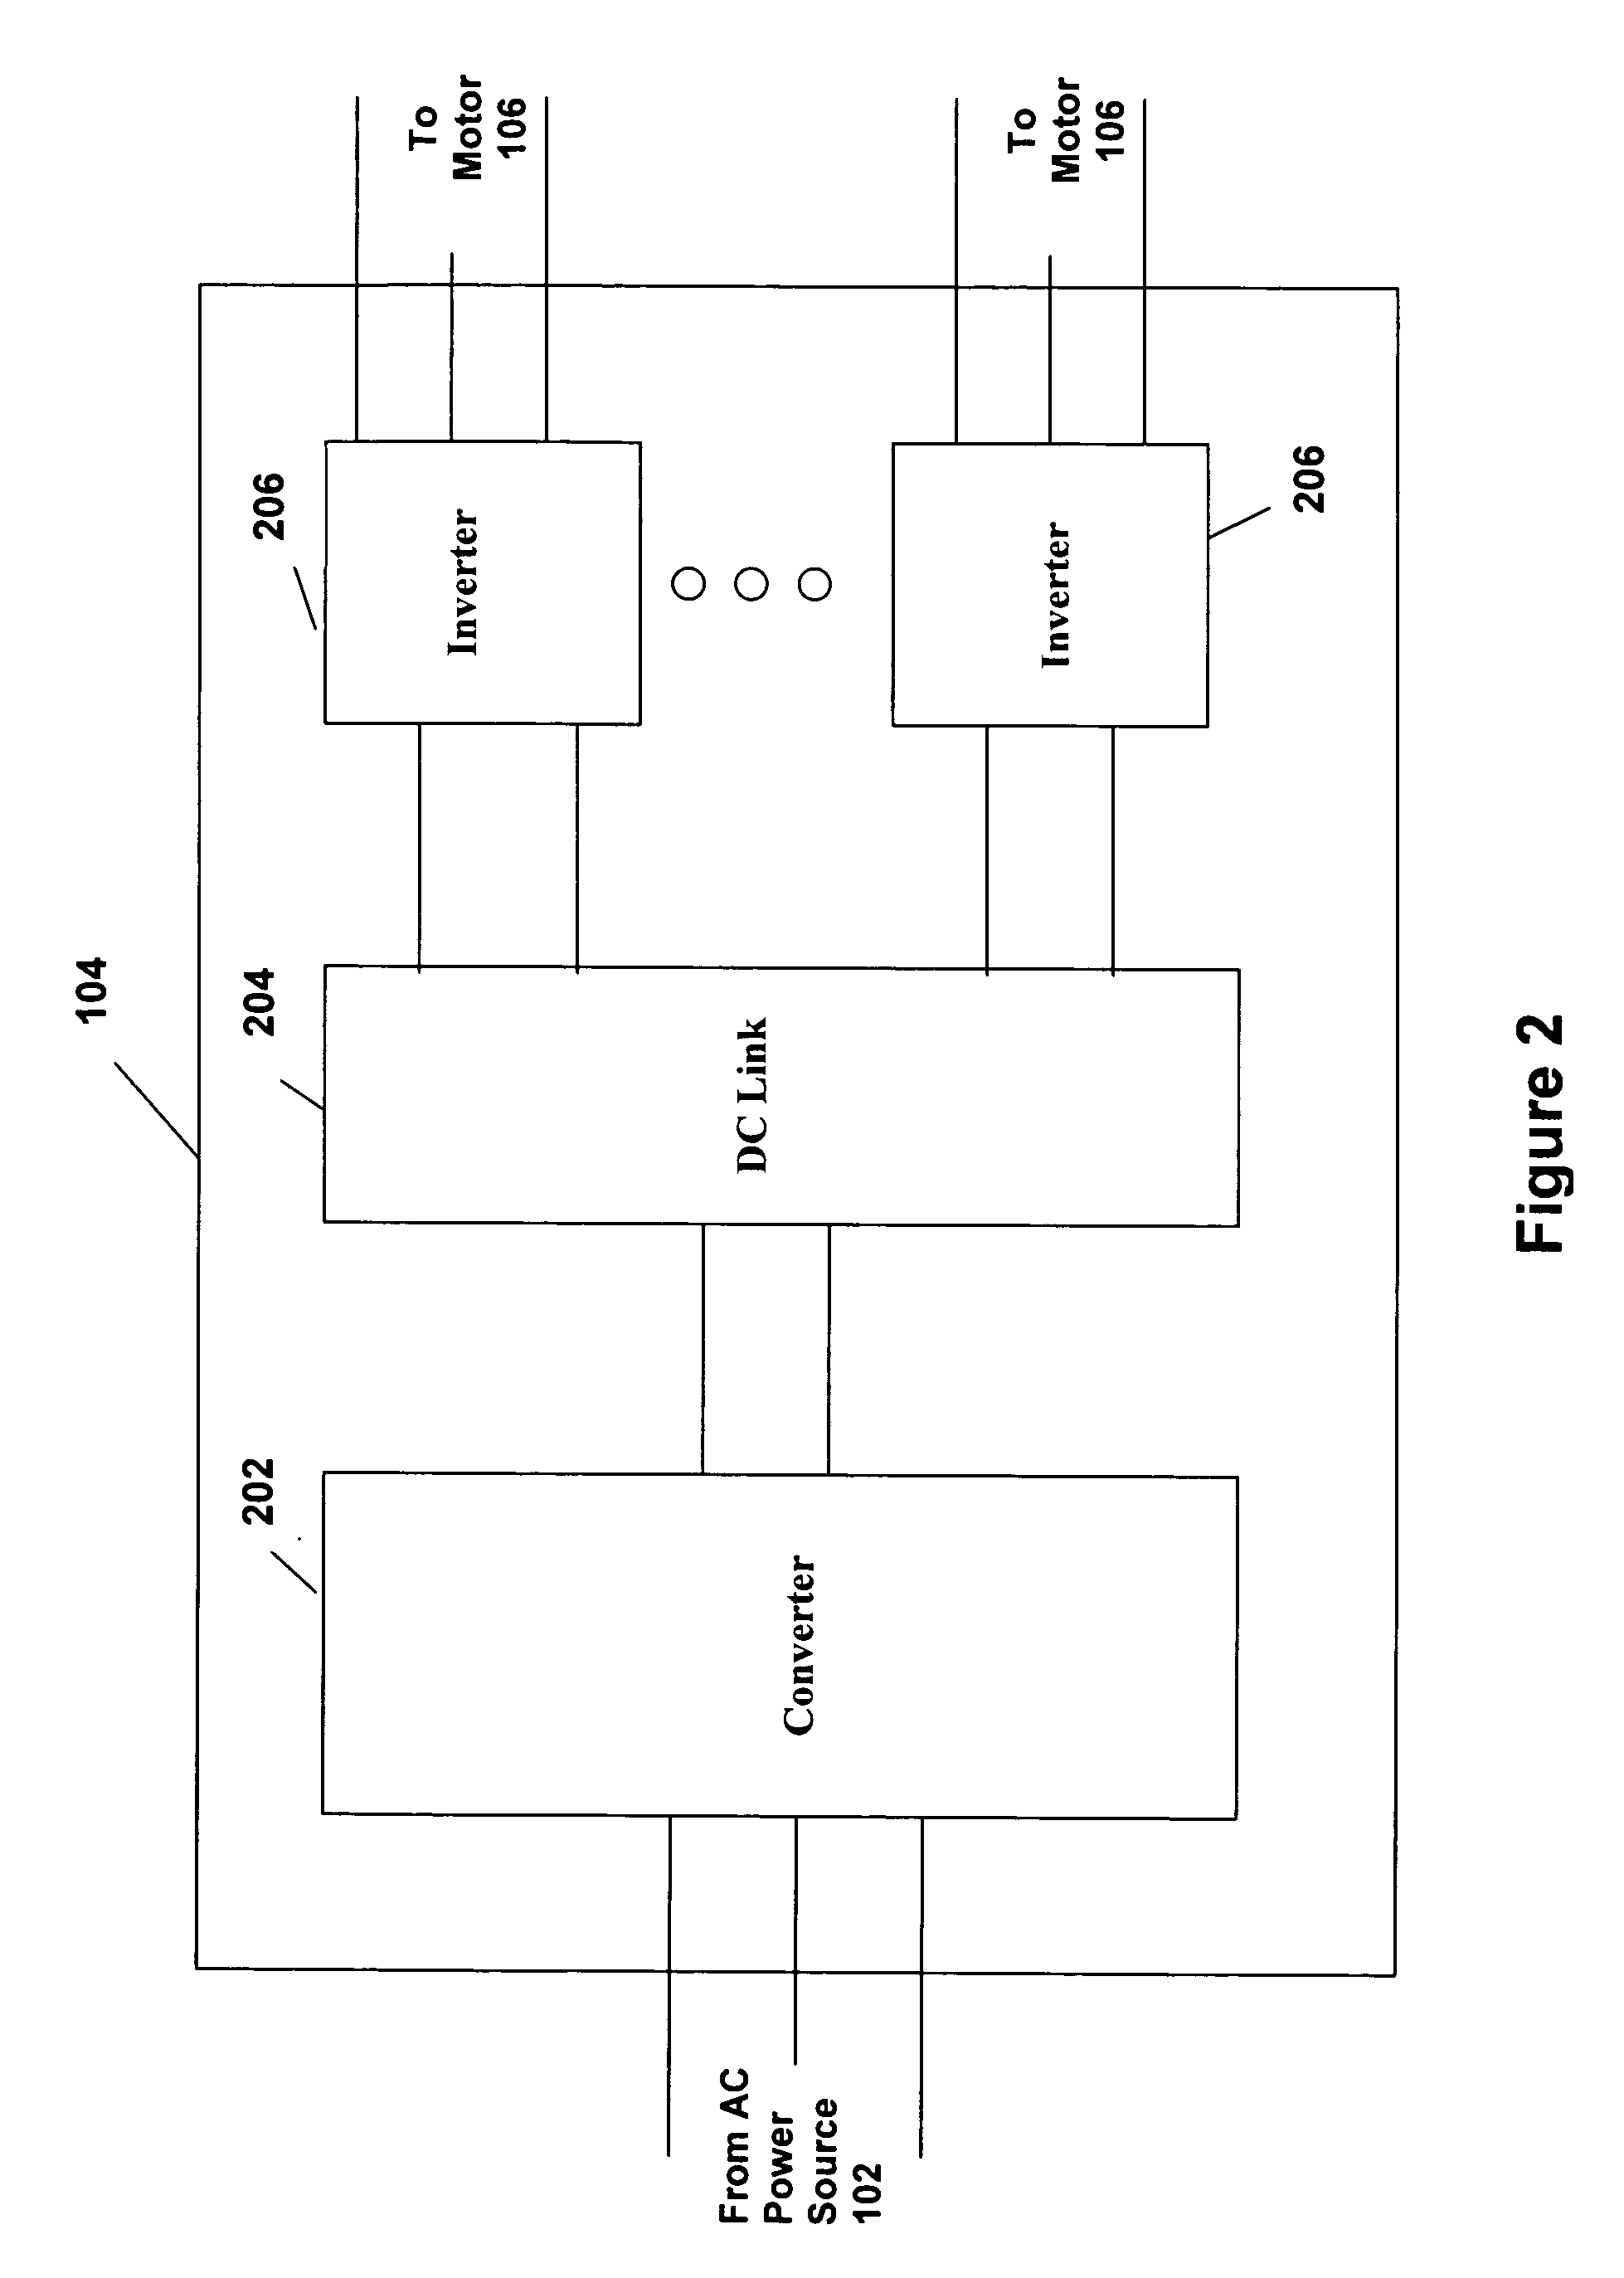 Startup control system and method for a multiple compressor chiller system